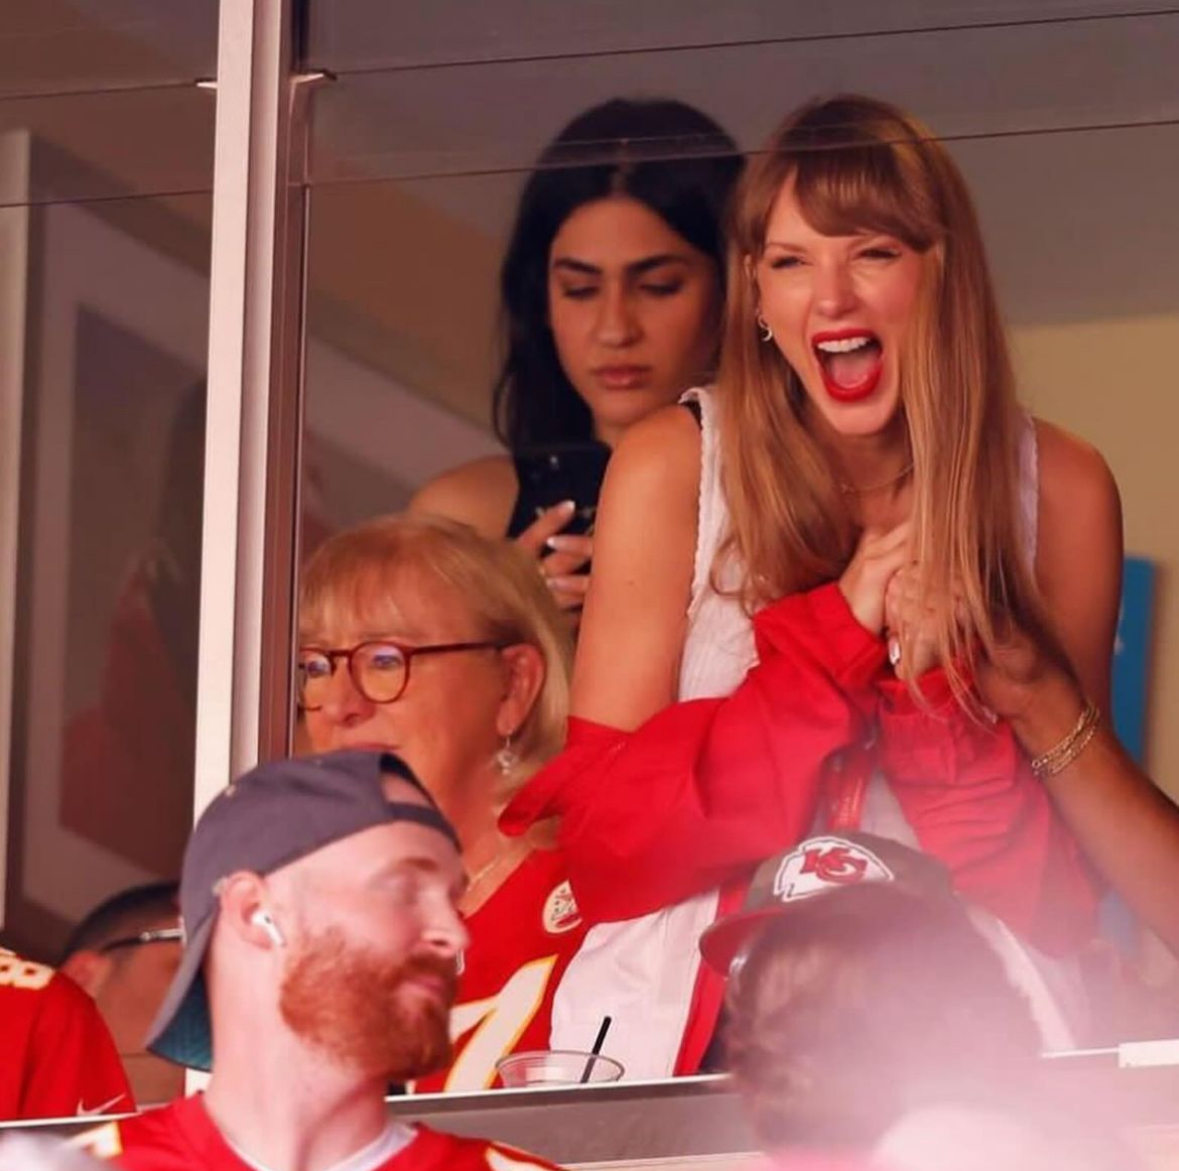 Taylor Swift at the Chiefs game vs. the Bears on Sept. 24